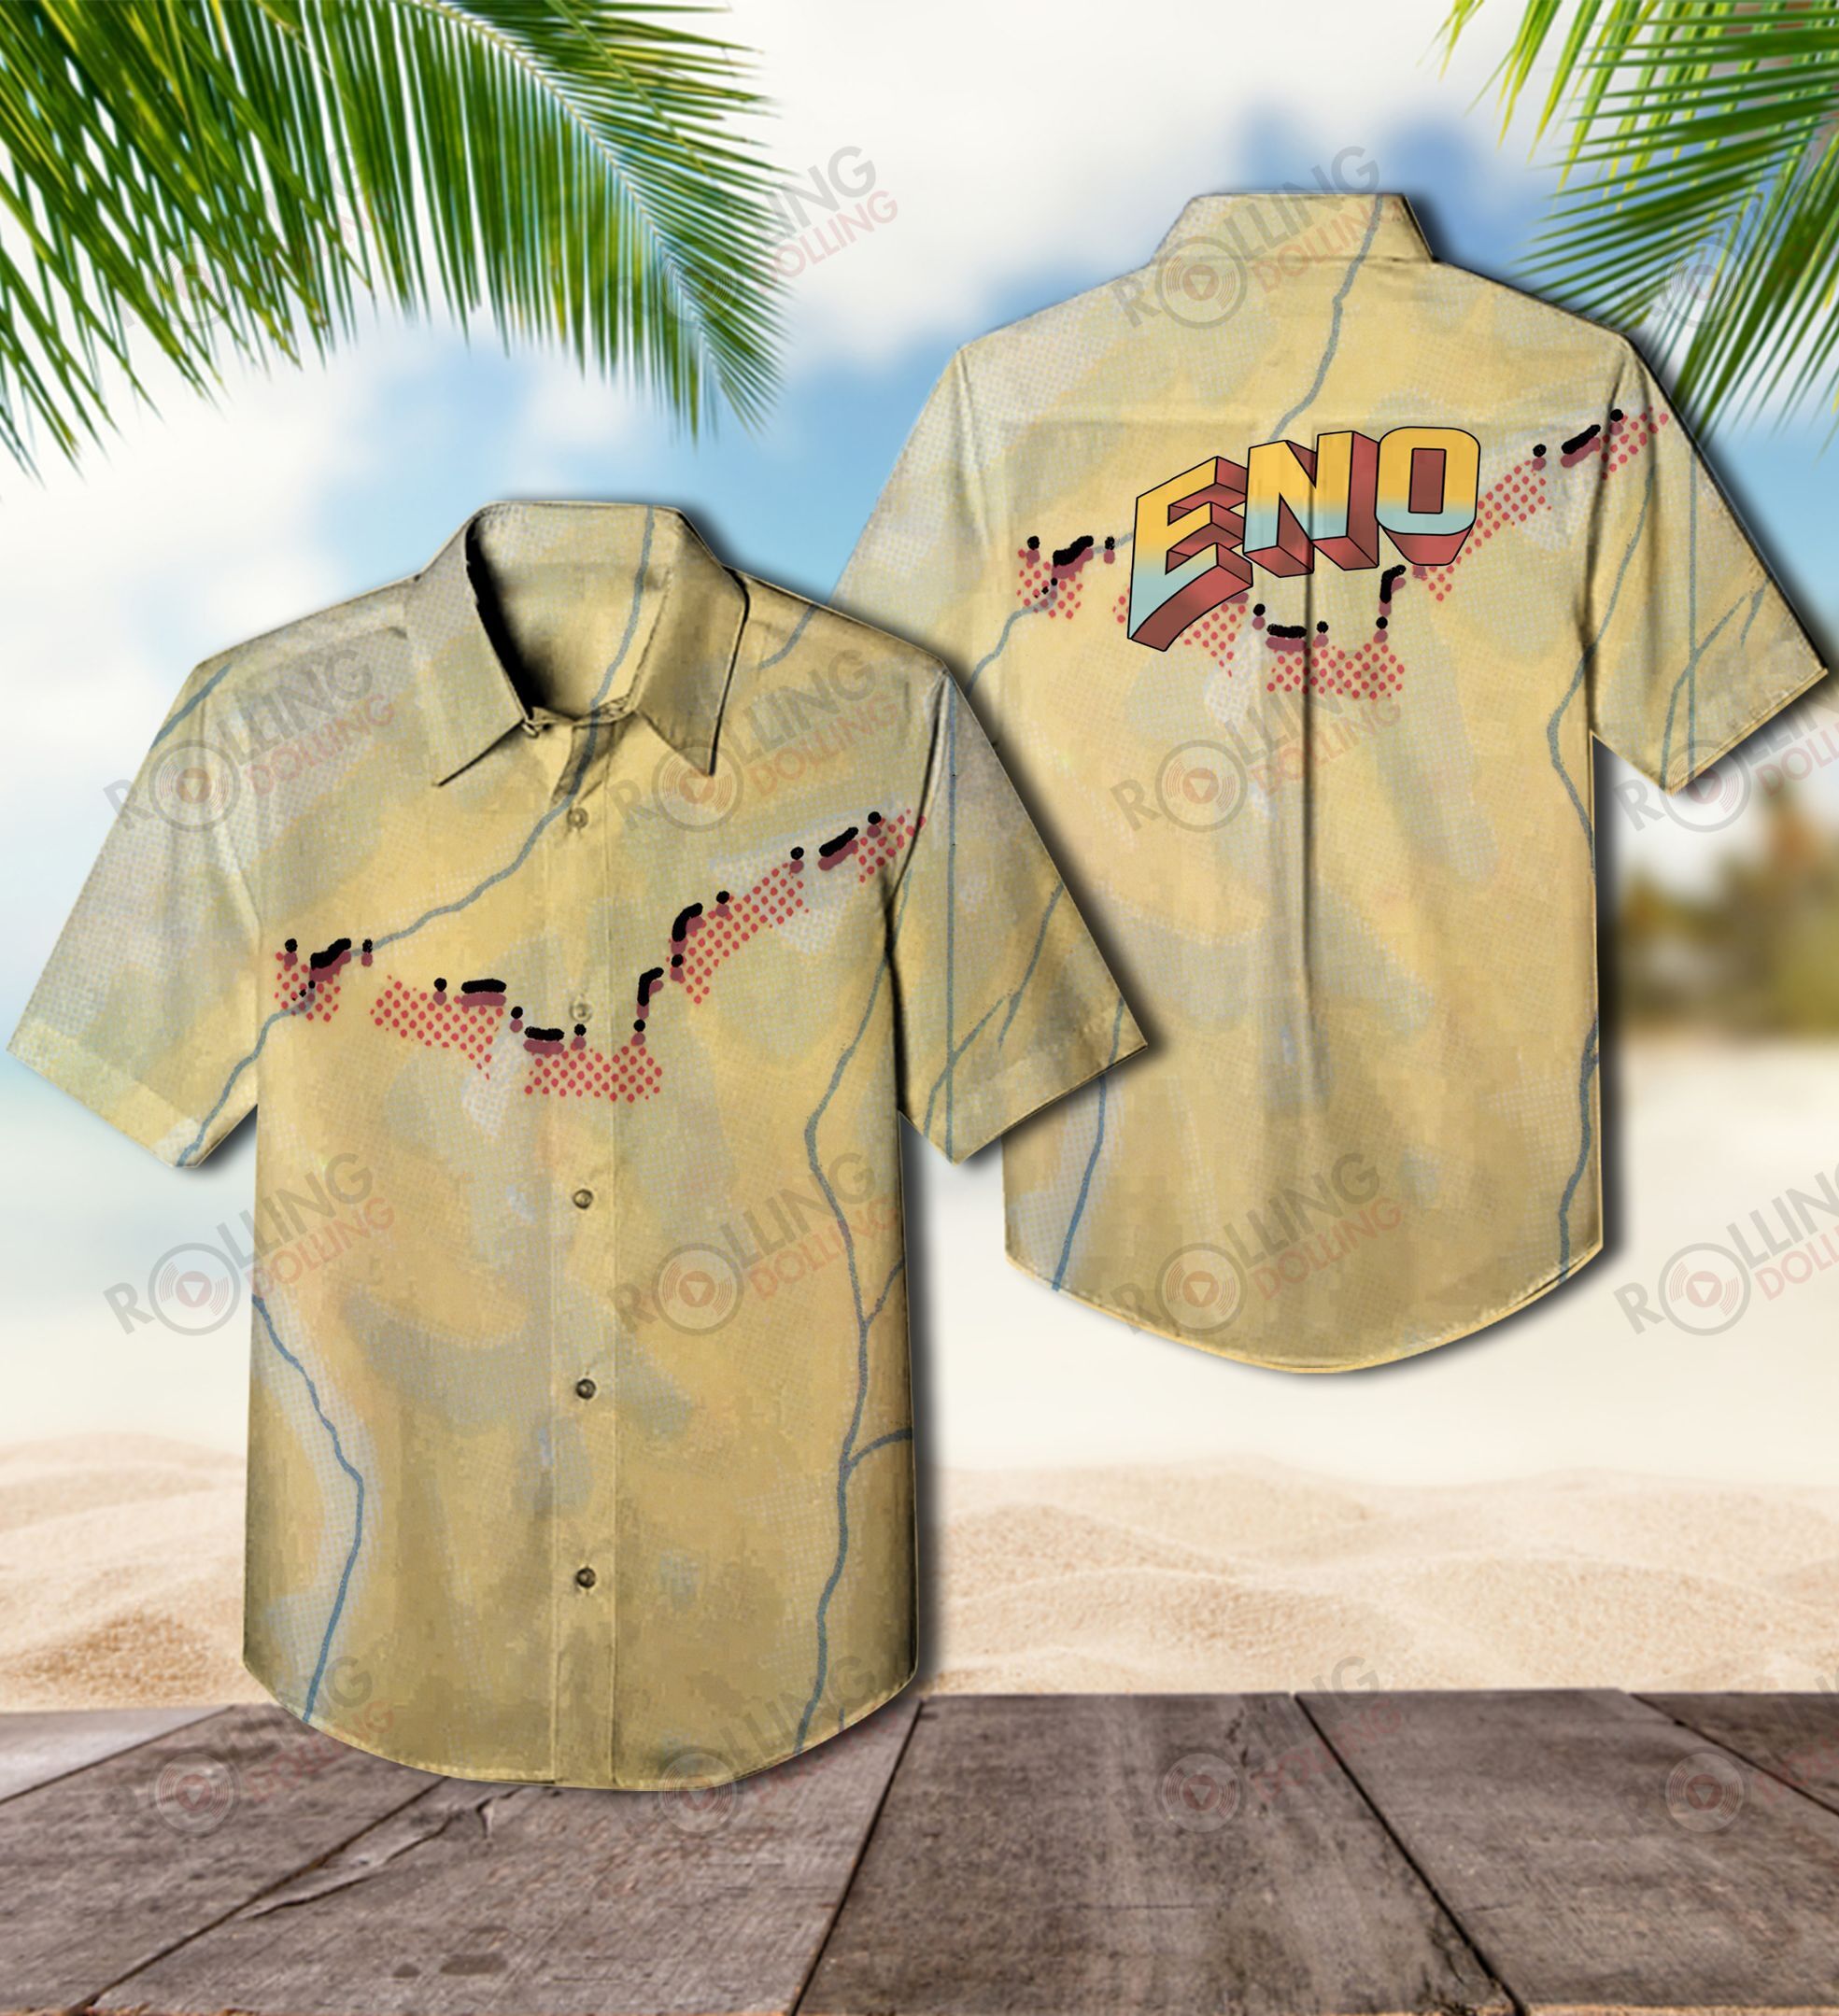 You'll have the perfect vacation outfit with this Hawaiian shirt 299